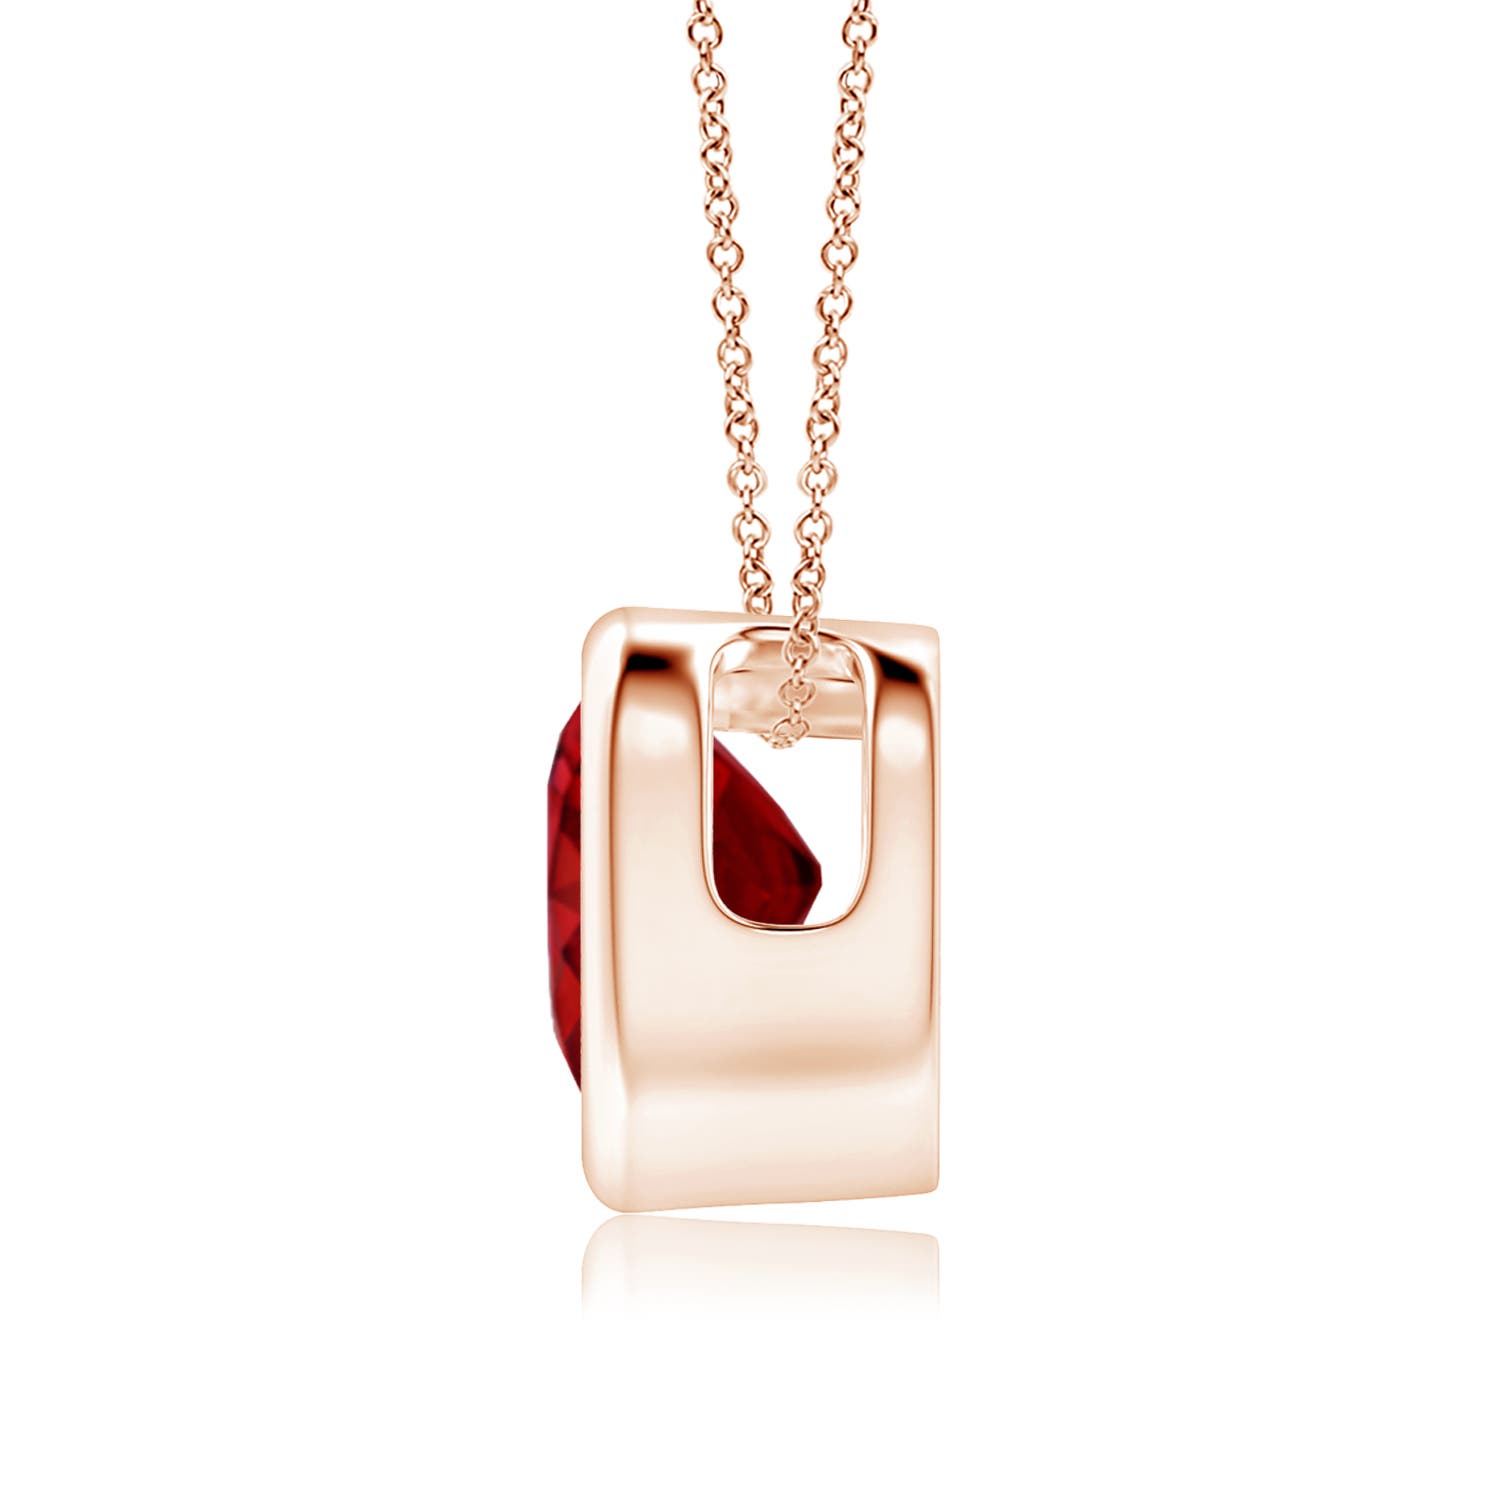 AAAA - Ruby / 0.8 CT / 14 KT Rose Gold